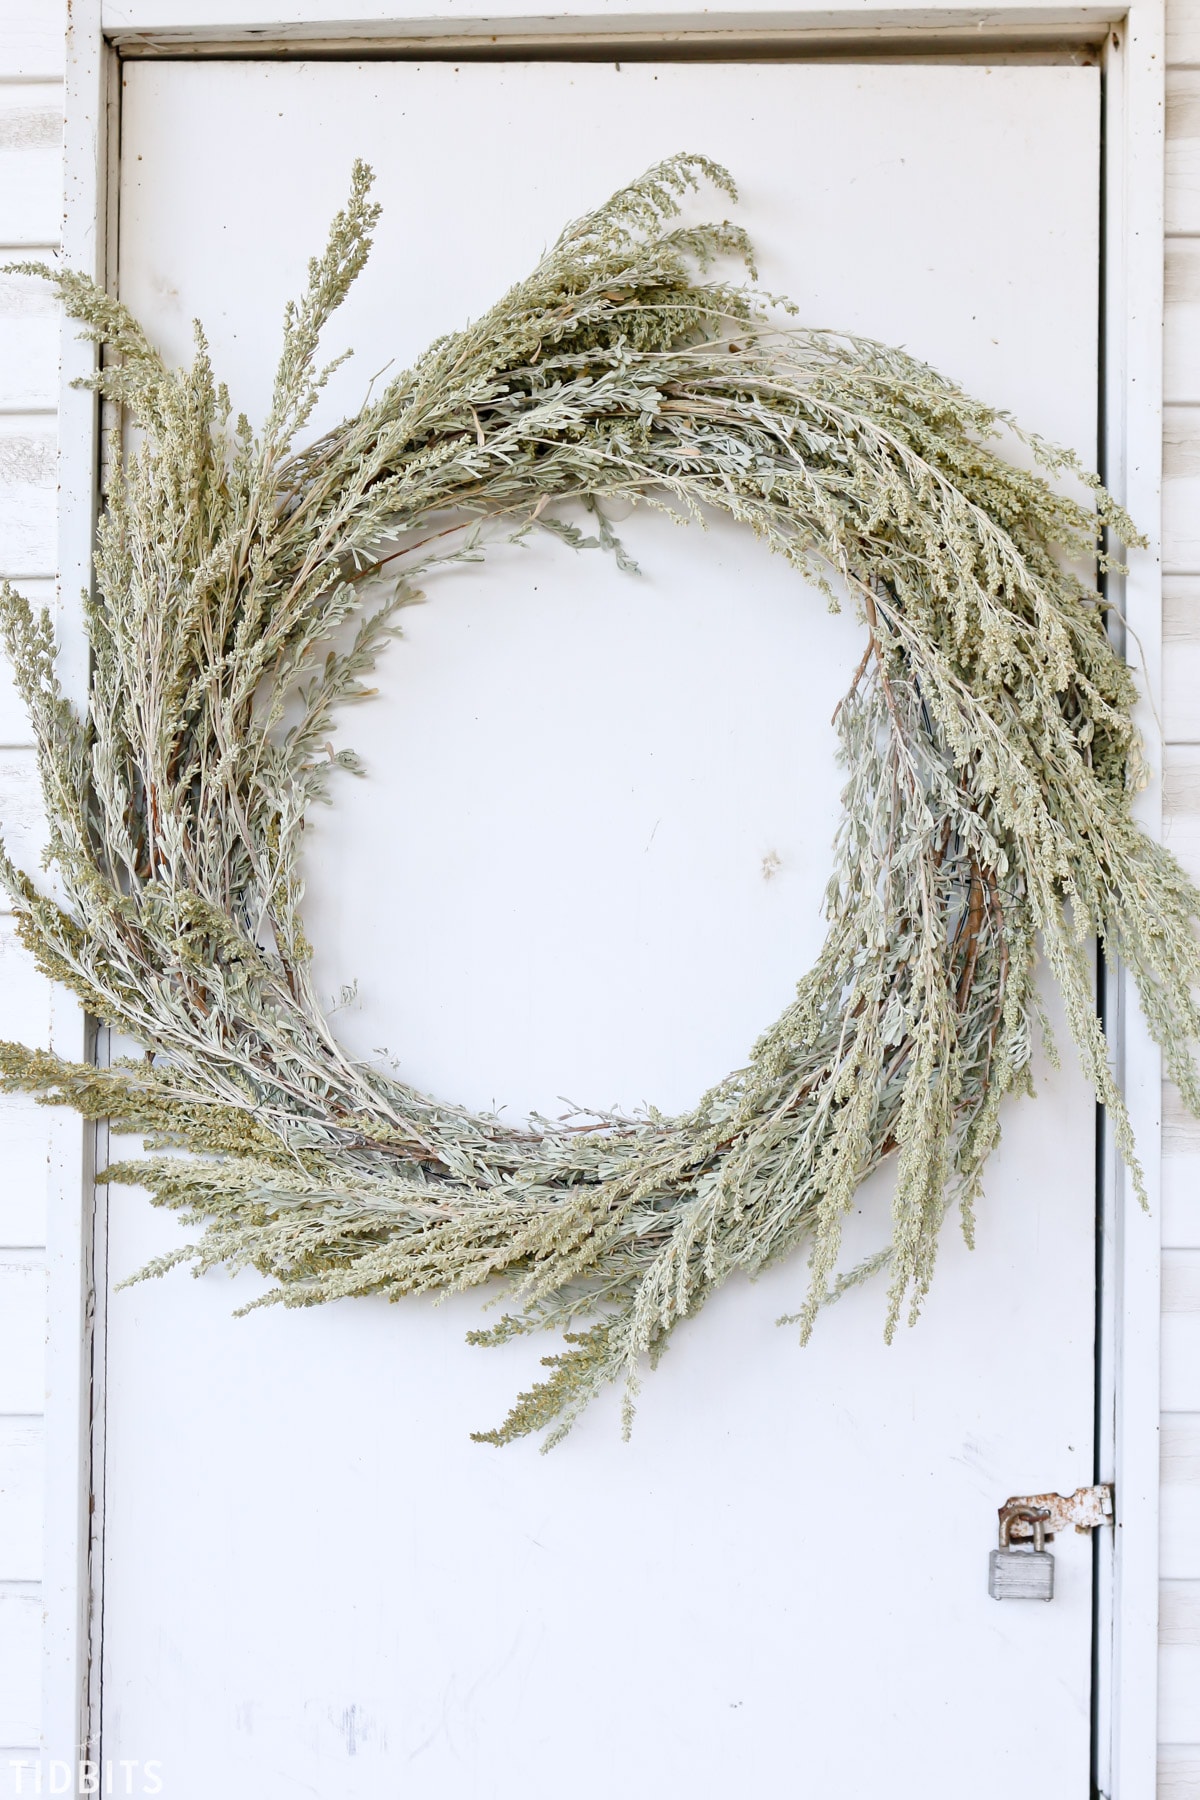 Wreath made from sage brush for Fall decor